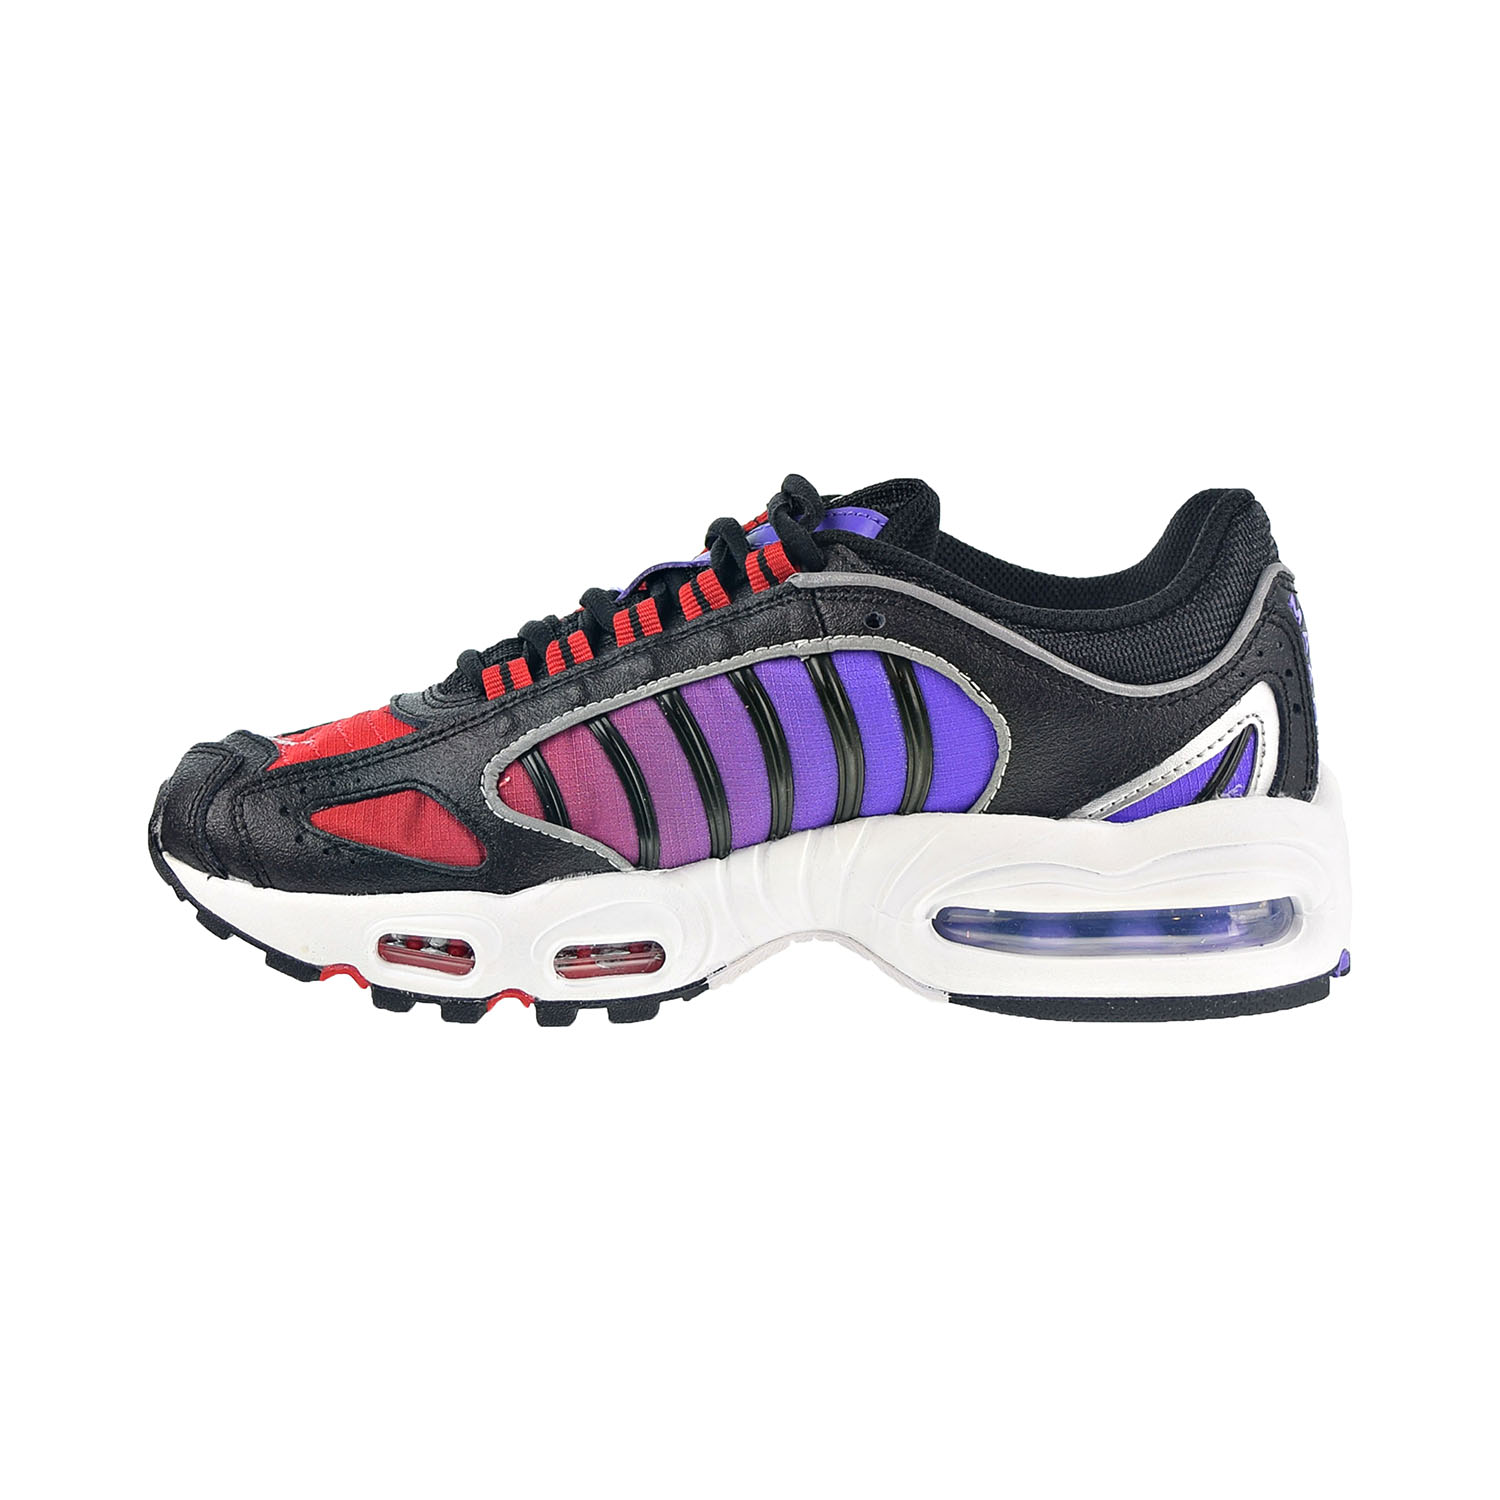 Nike Women's Air Max Tailwind IV Shoes Black-White-University Red-Psychic Purple cq9962-001 - image 4 of 6